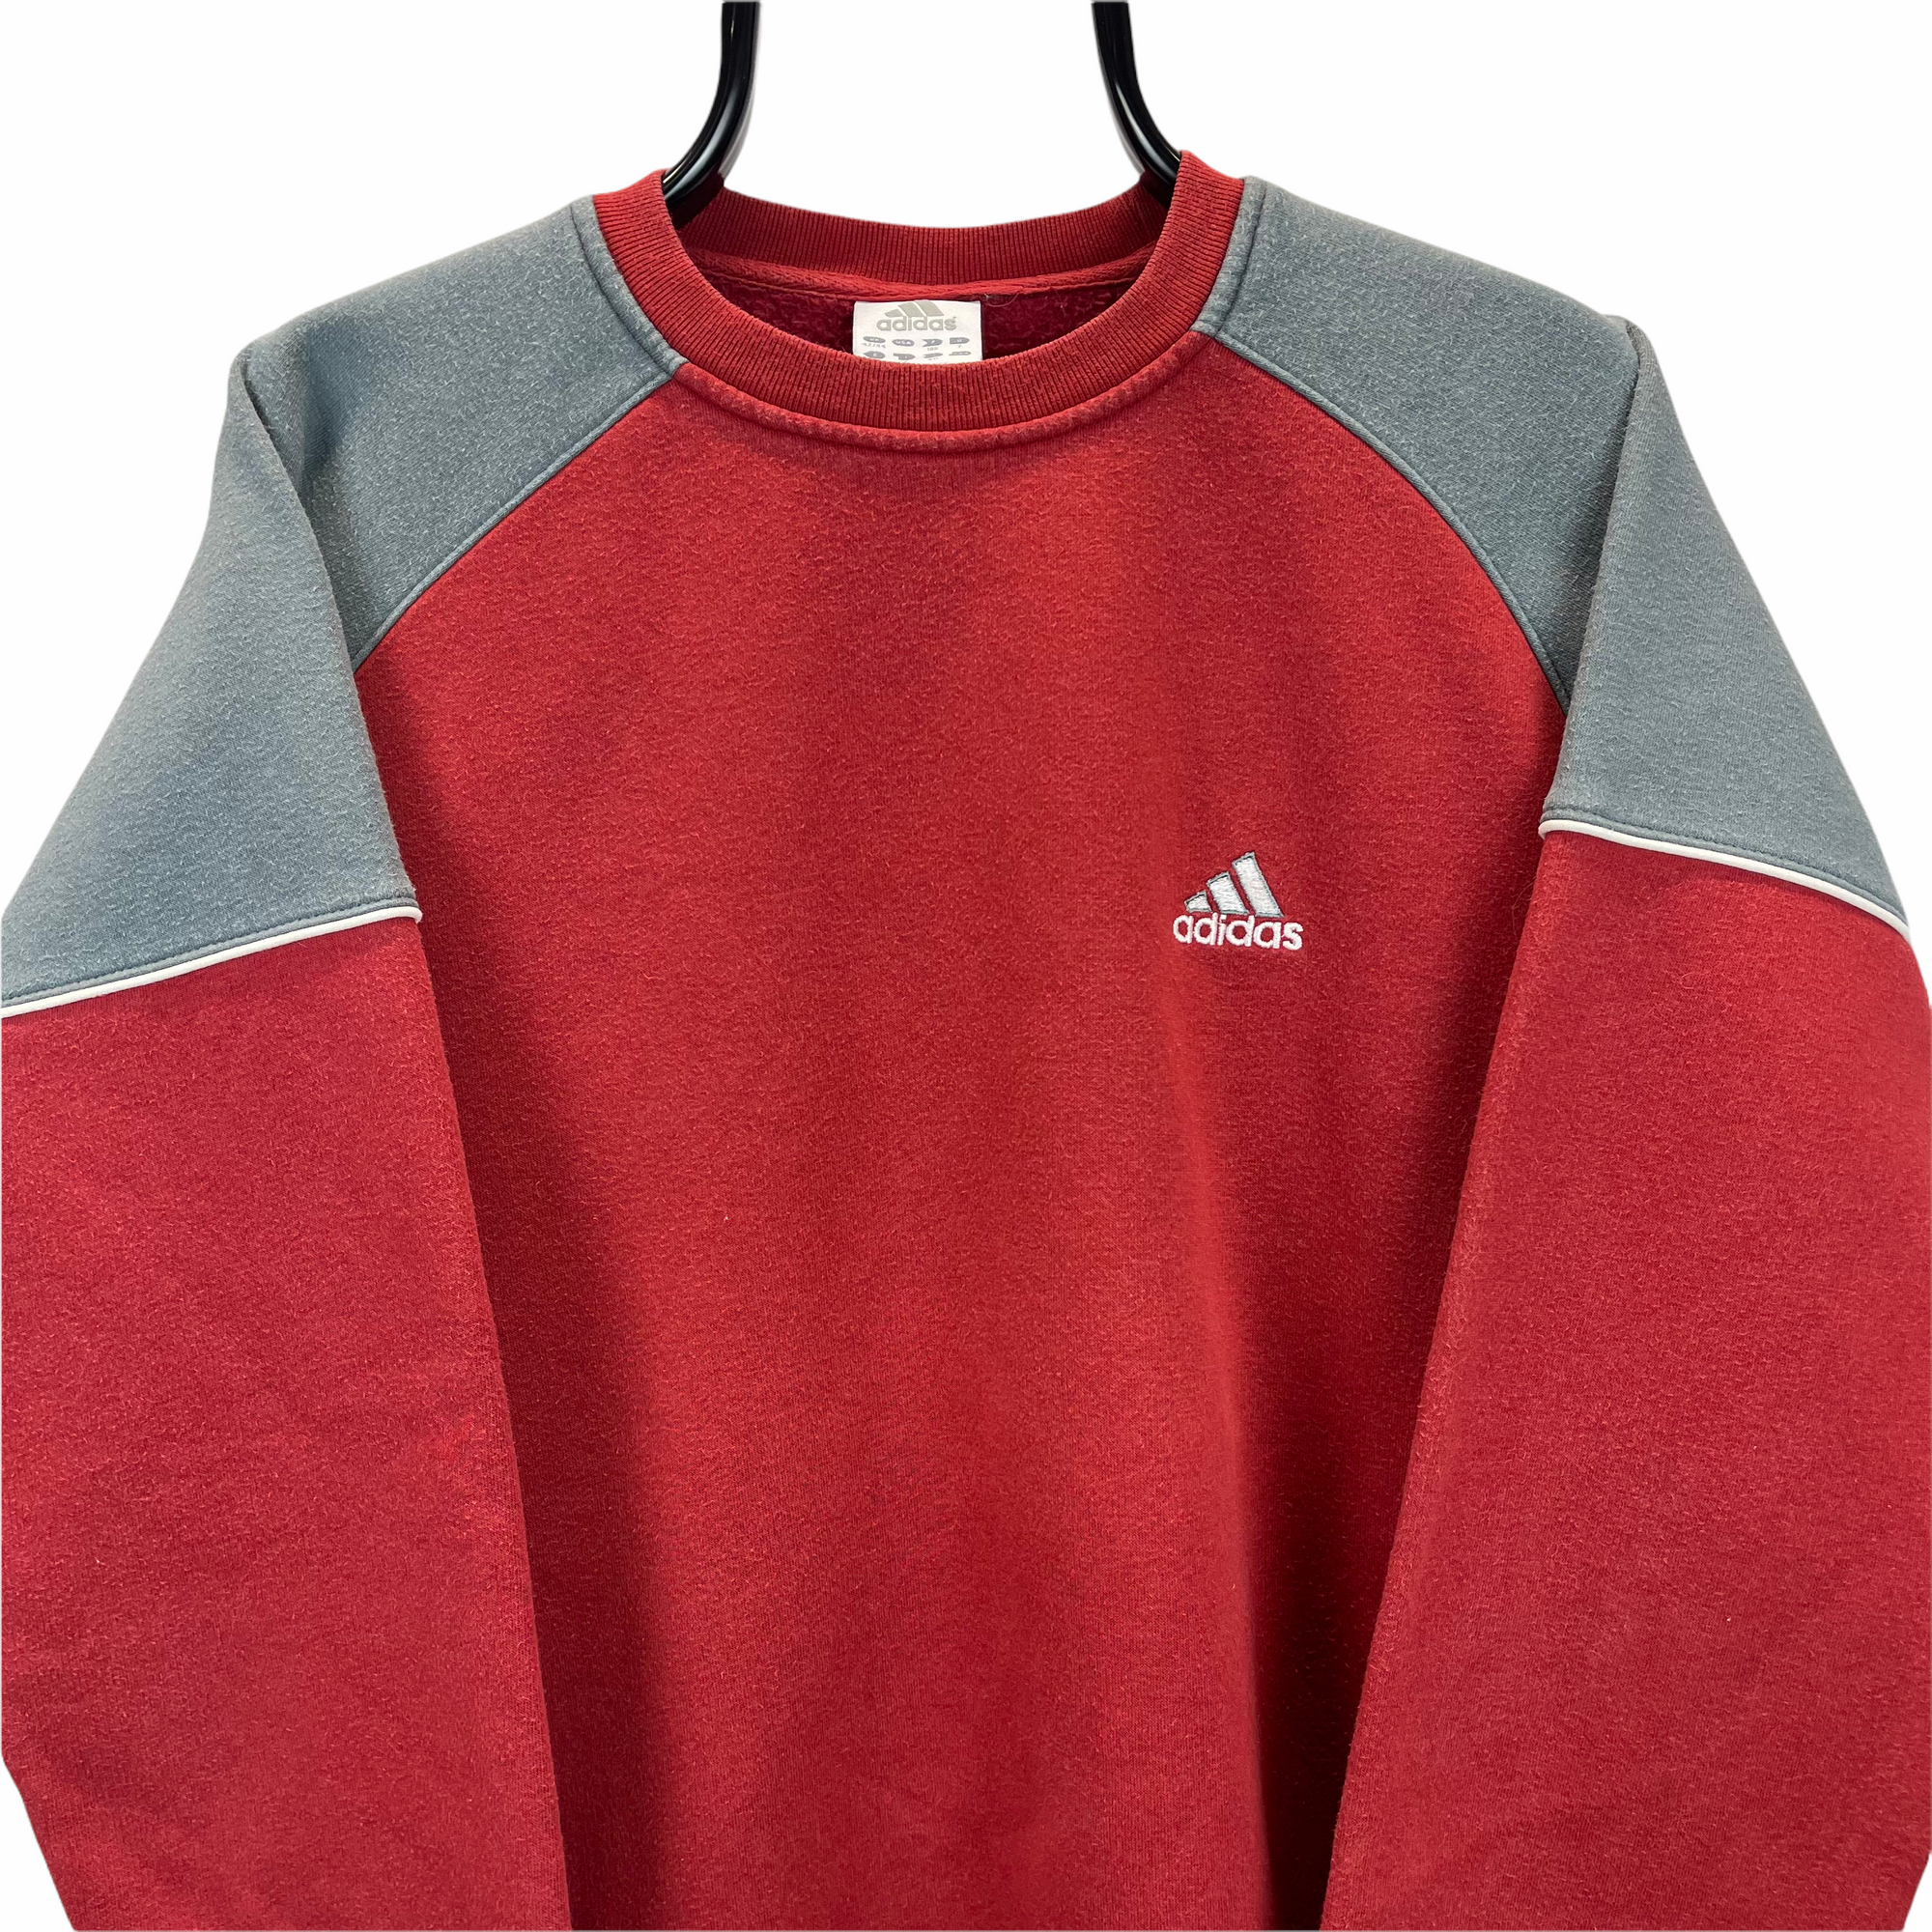 VINTAGE ADIDAS EMBROIDERED SMALL LOGO SWEATSHIRT IN DEEP RED & GREY - MEN'S LARGE/WOMEN'S XL